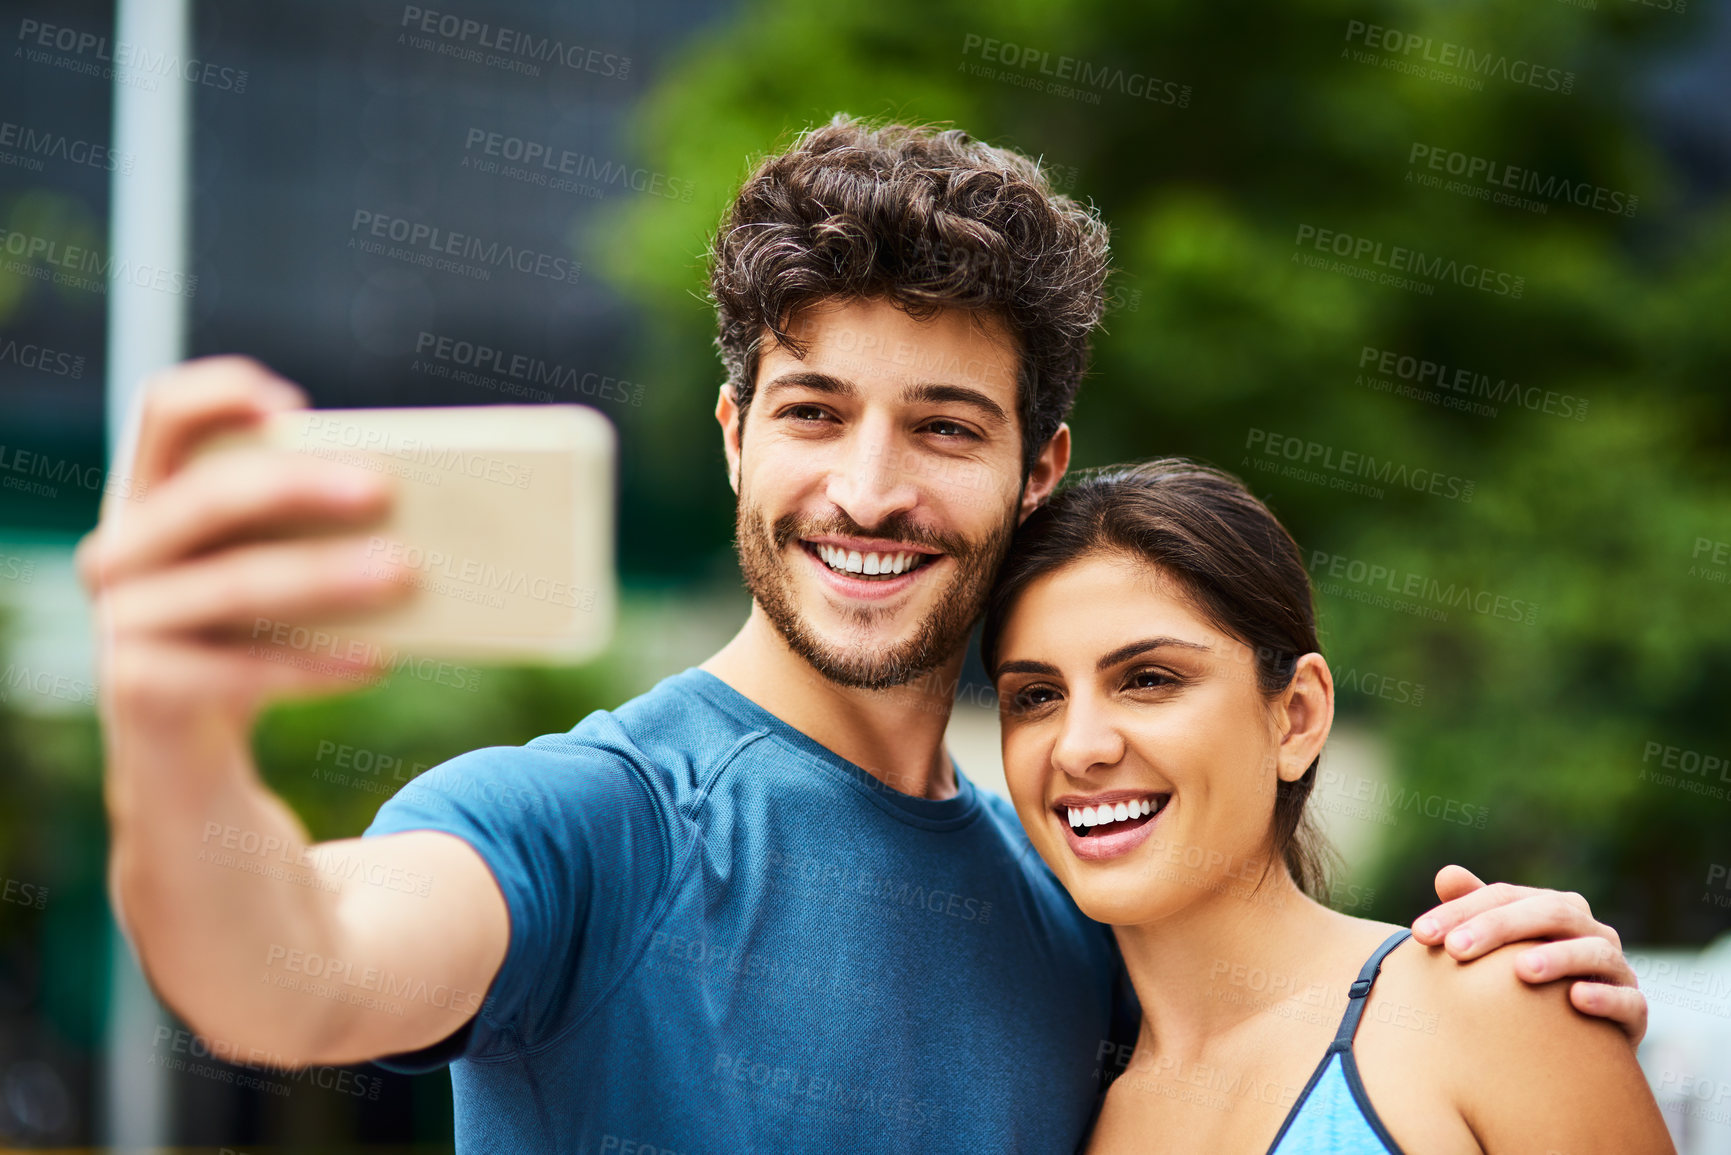 Buy stock photo Shot of a sporty young couple taking a selfie together outdoors